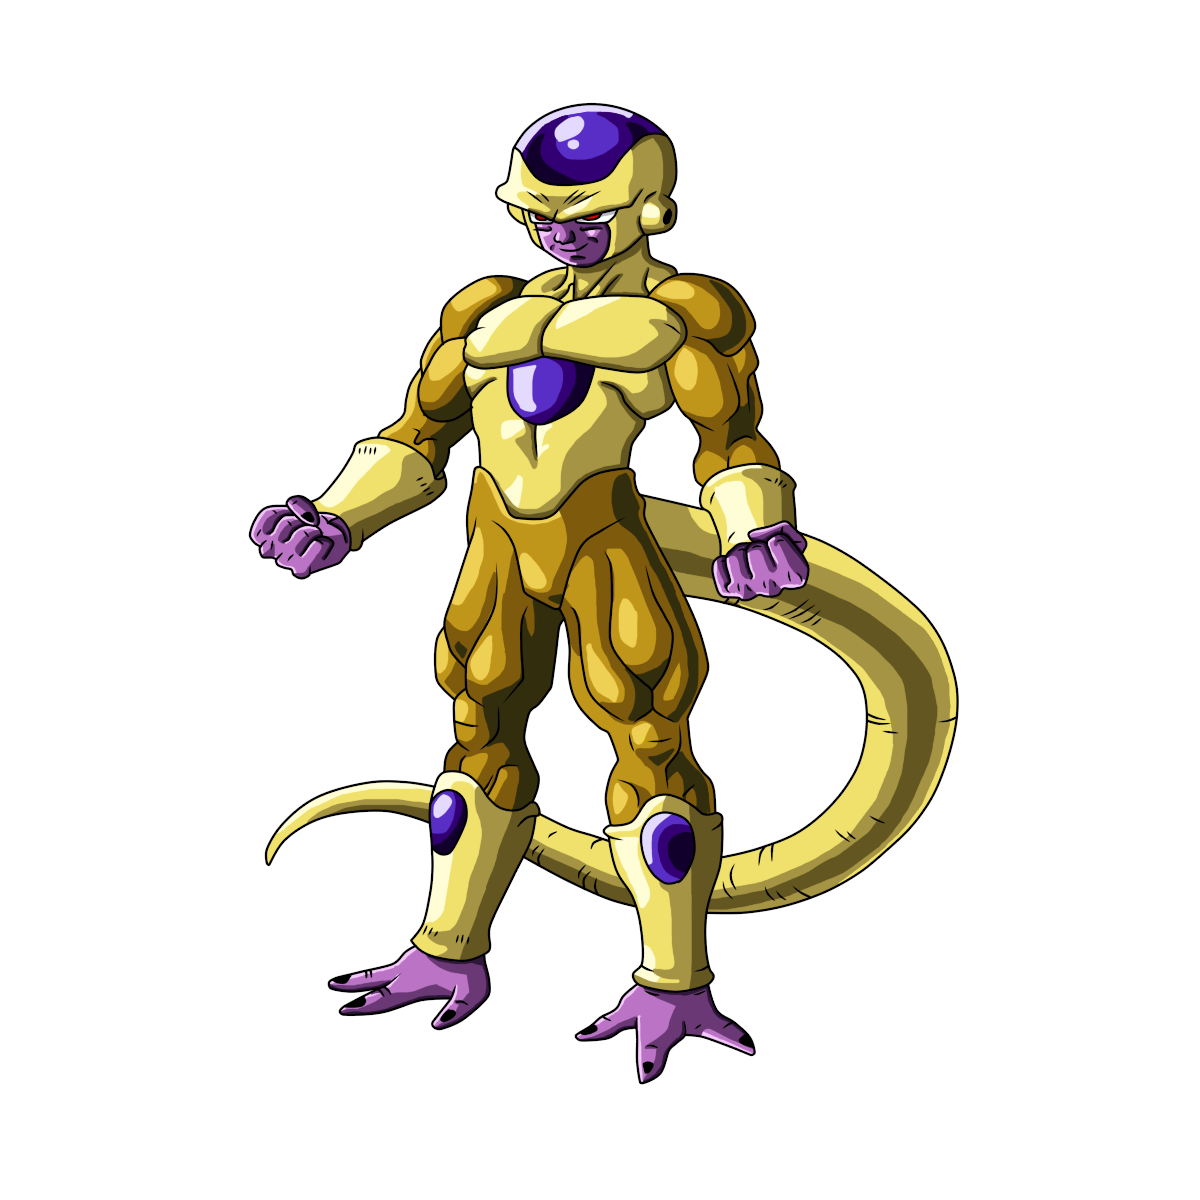 free-download-golden-frieza-full-body-render-by-evil-black-sparx-on